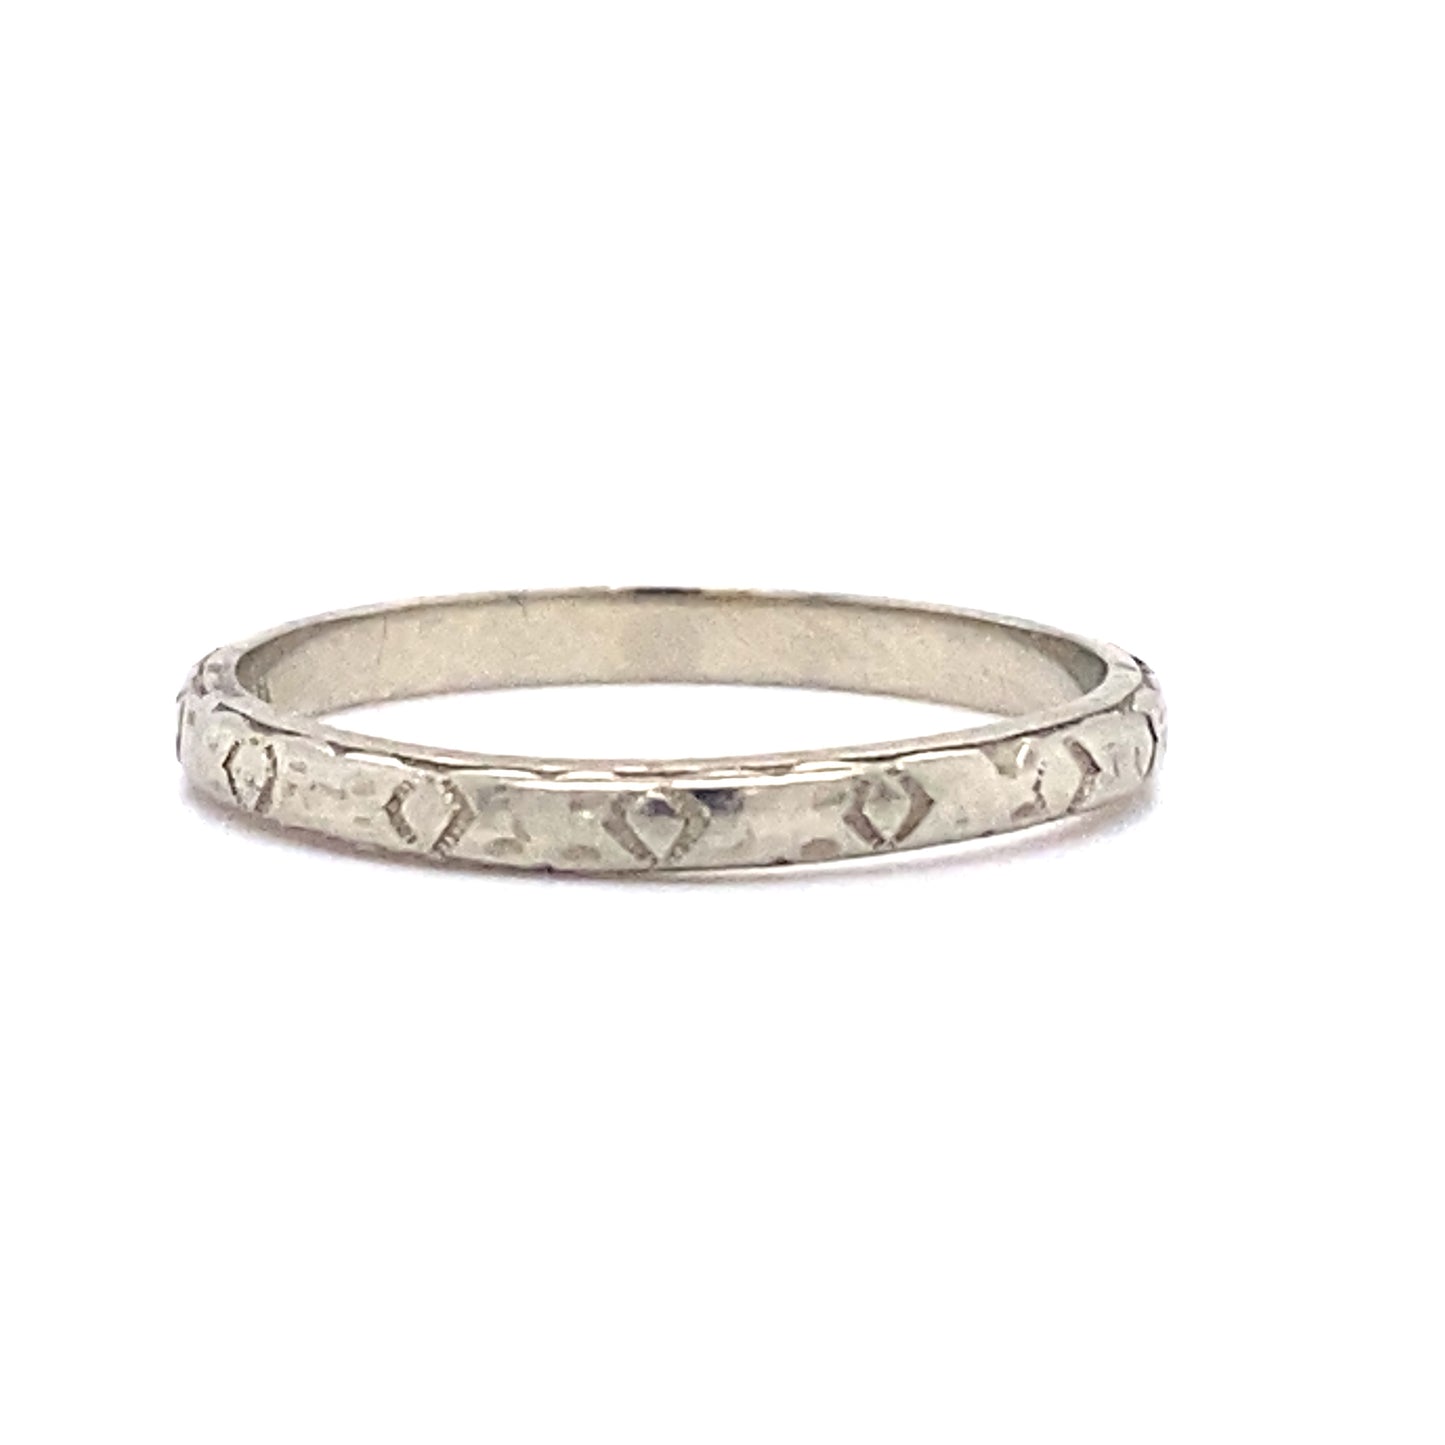 Circa 1920s Belais Art Deco Etched Wedding Band in 18K White Gold